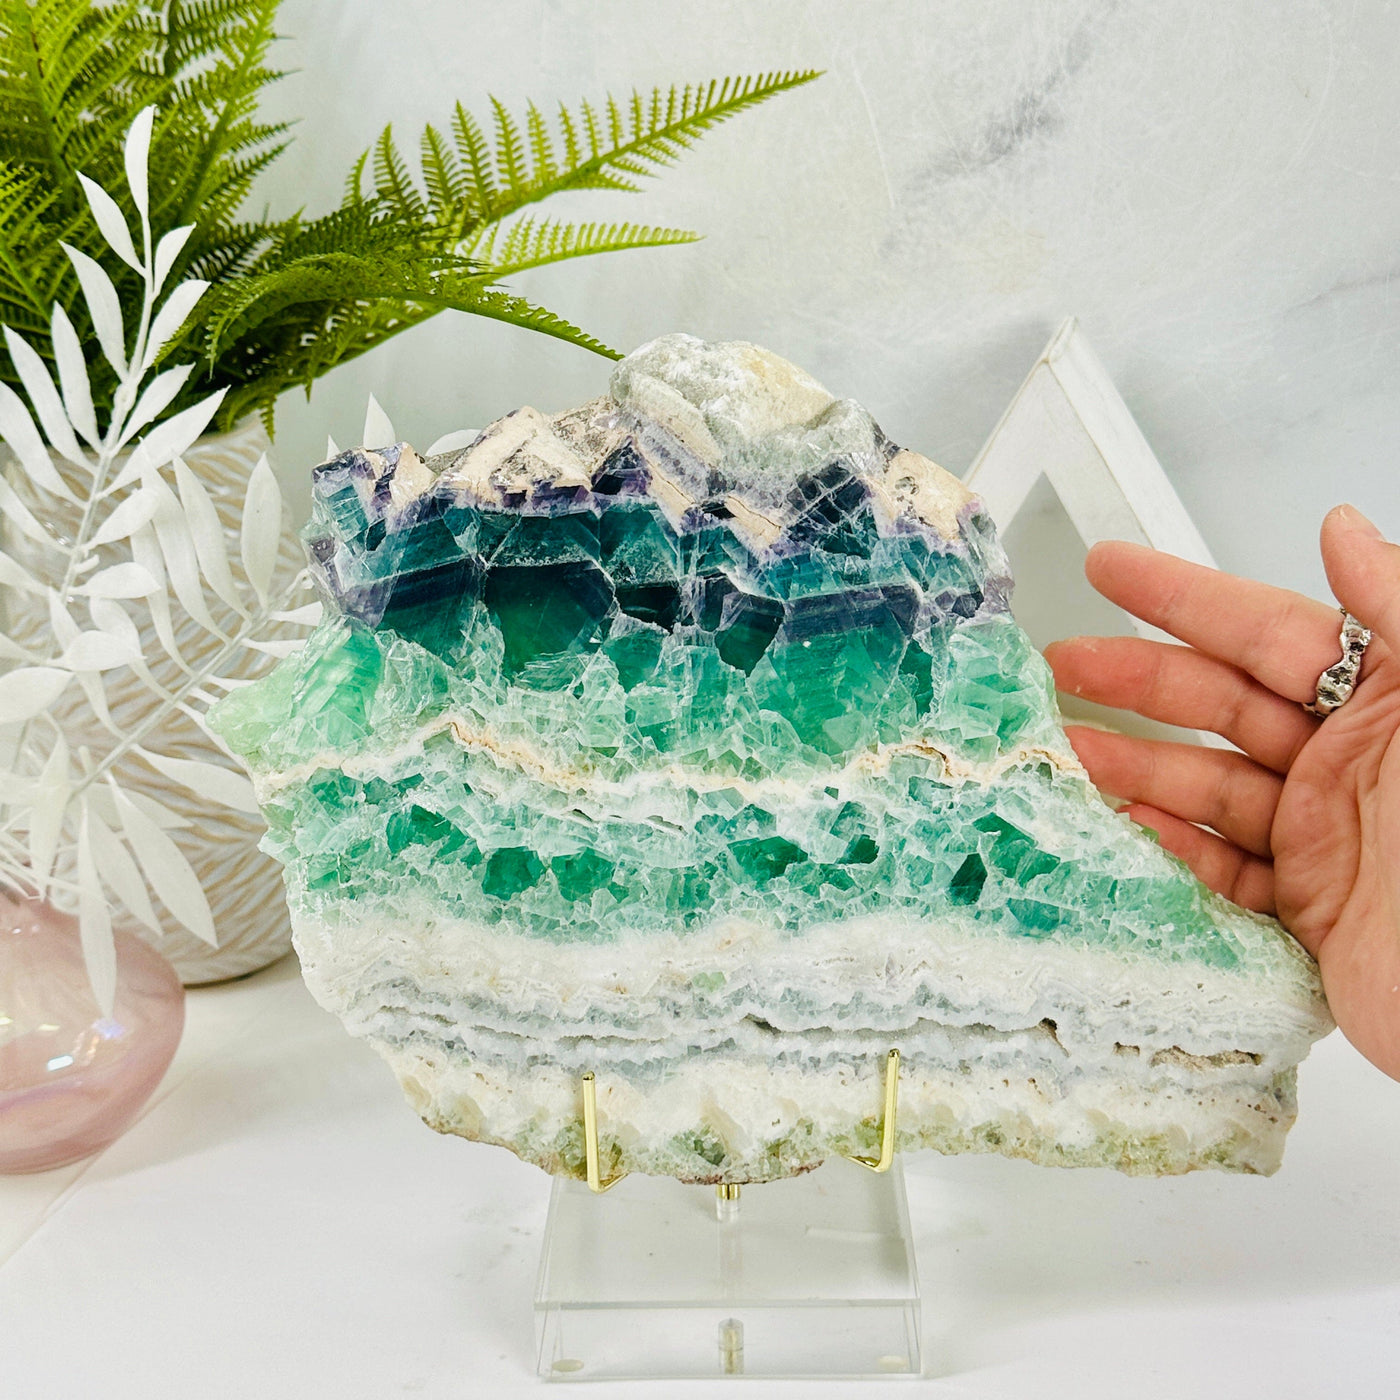 Fluorite Crystal Platter with hand for size reference